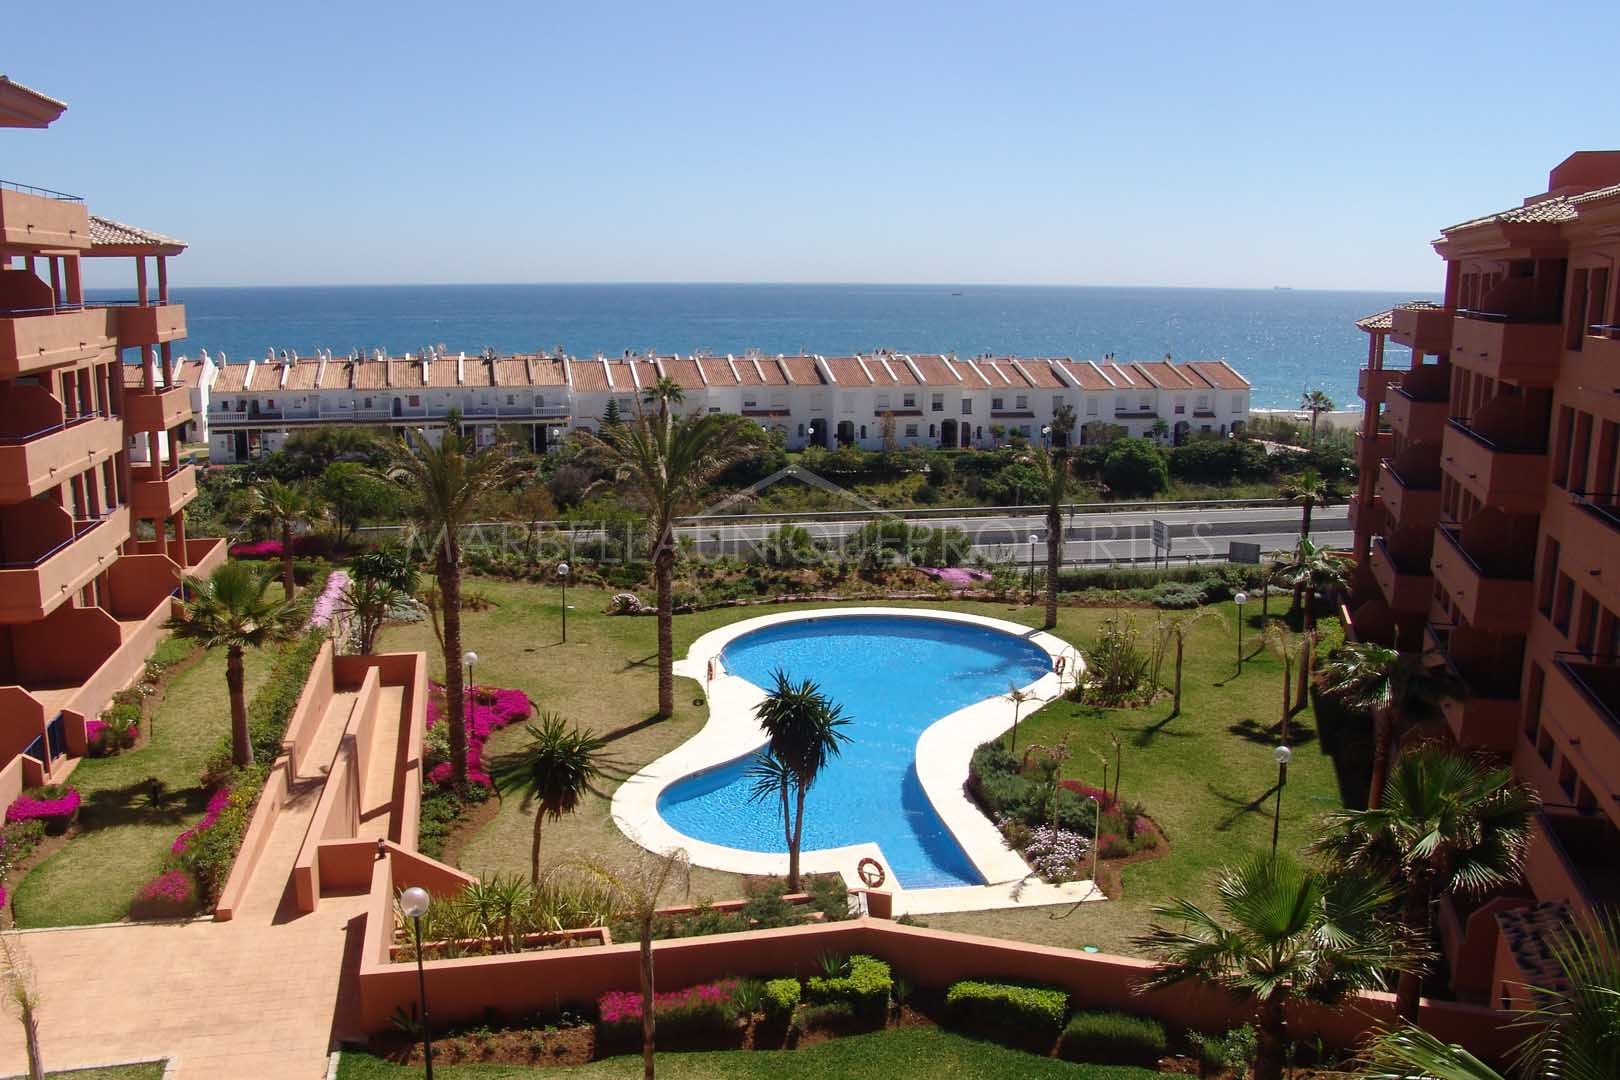 Splendid 2 bedroom apartment with sea views, close to the beach in Manilva